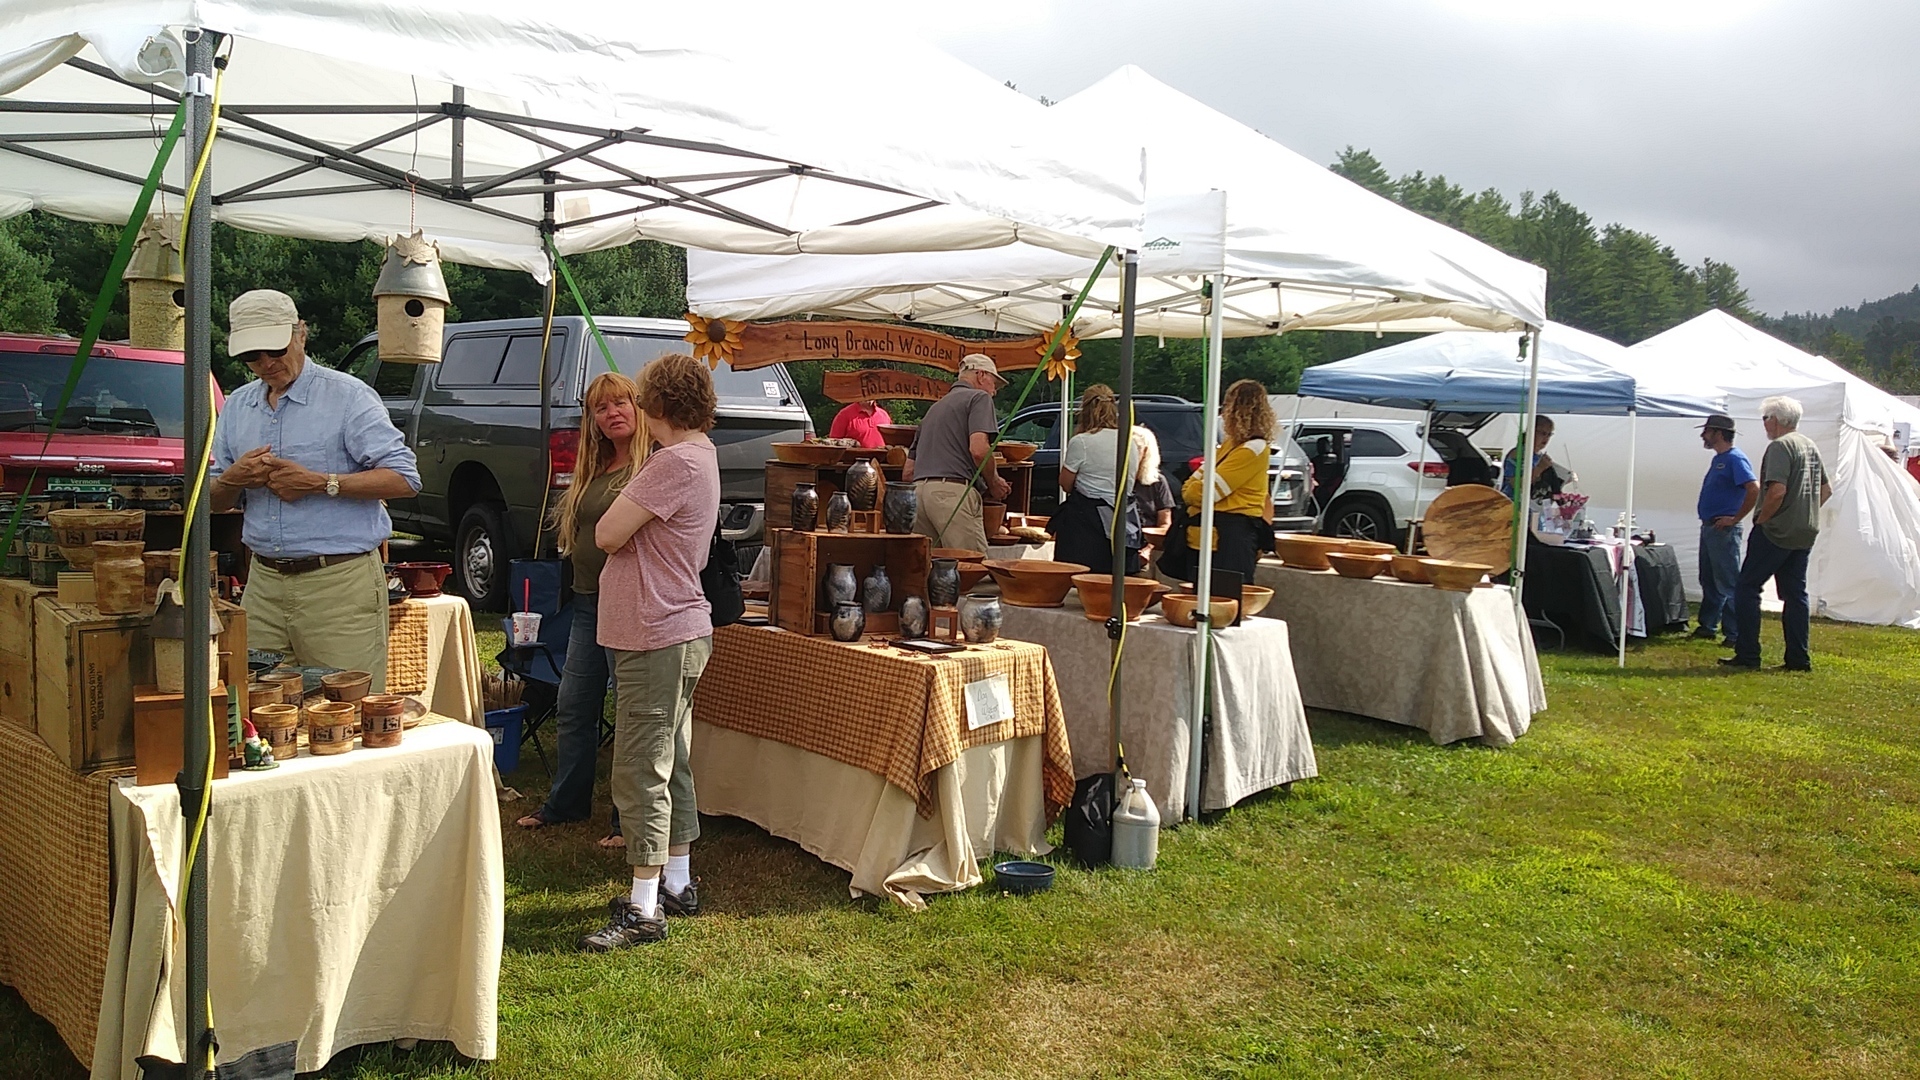 Fletcher Farm School for the Arts and Crafts Art and Craft Festival, Ludlow, Vermont, United States